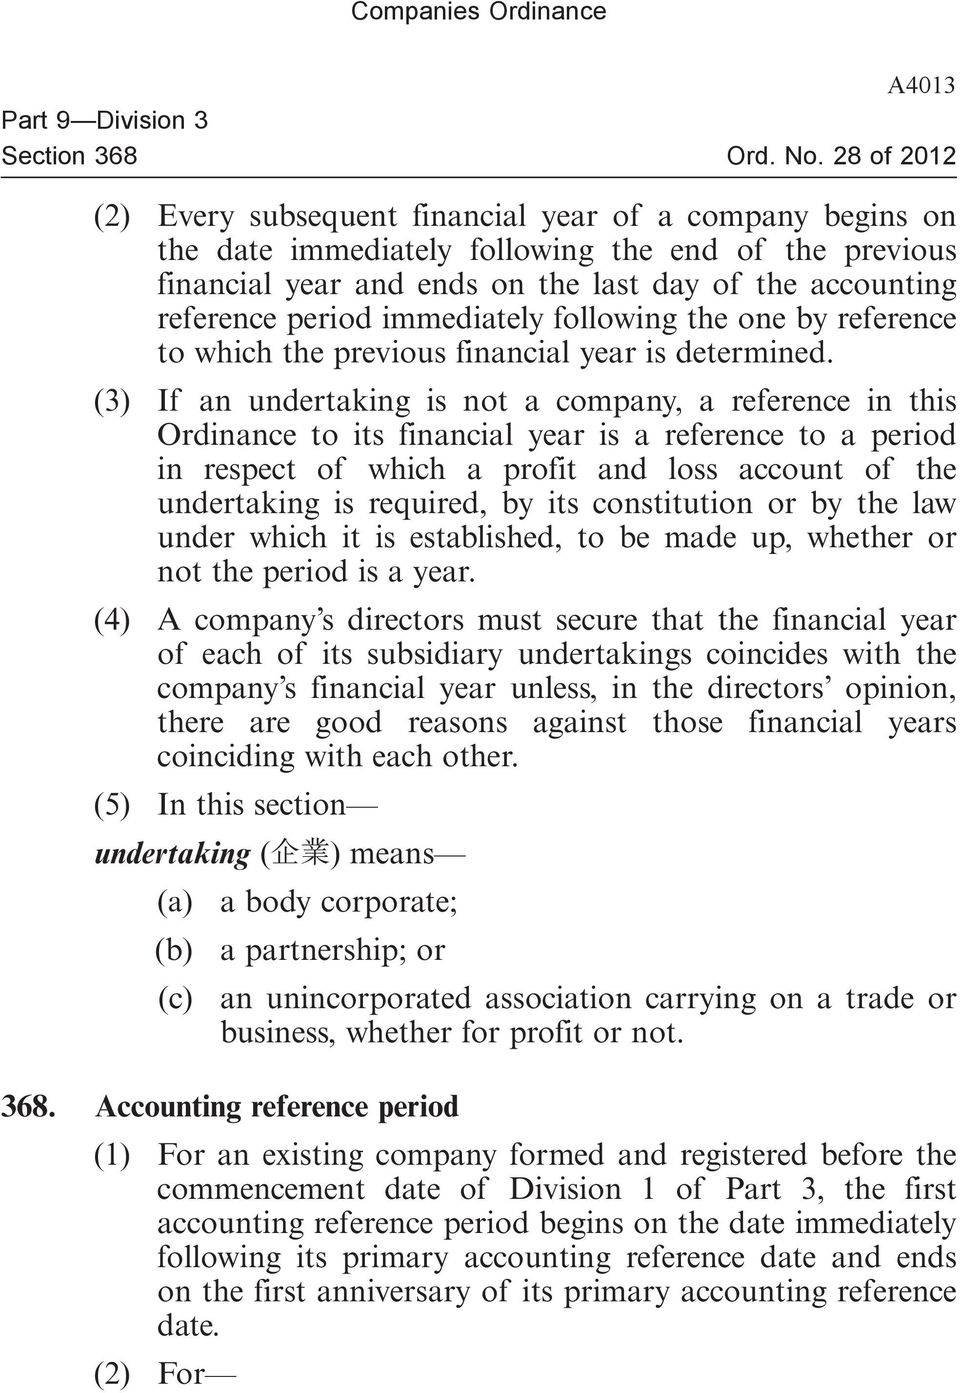 (3) If an undertaking is not a company, a reference in this Ordinance to its financial year is a reference to a period in respect of which a profit and loss account of the undertaking is required, by